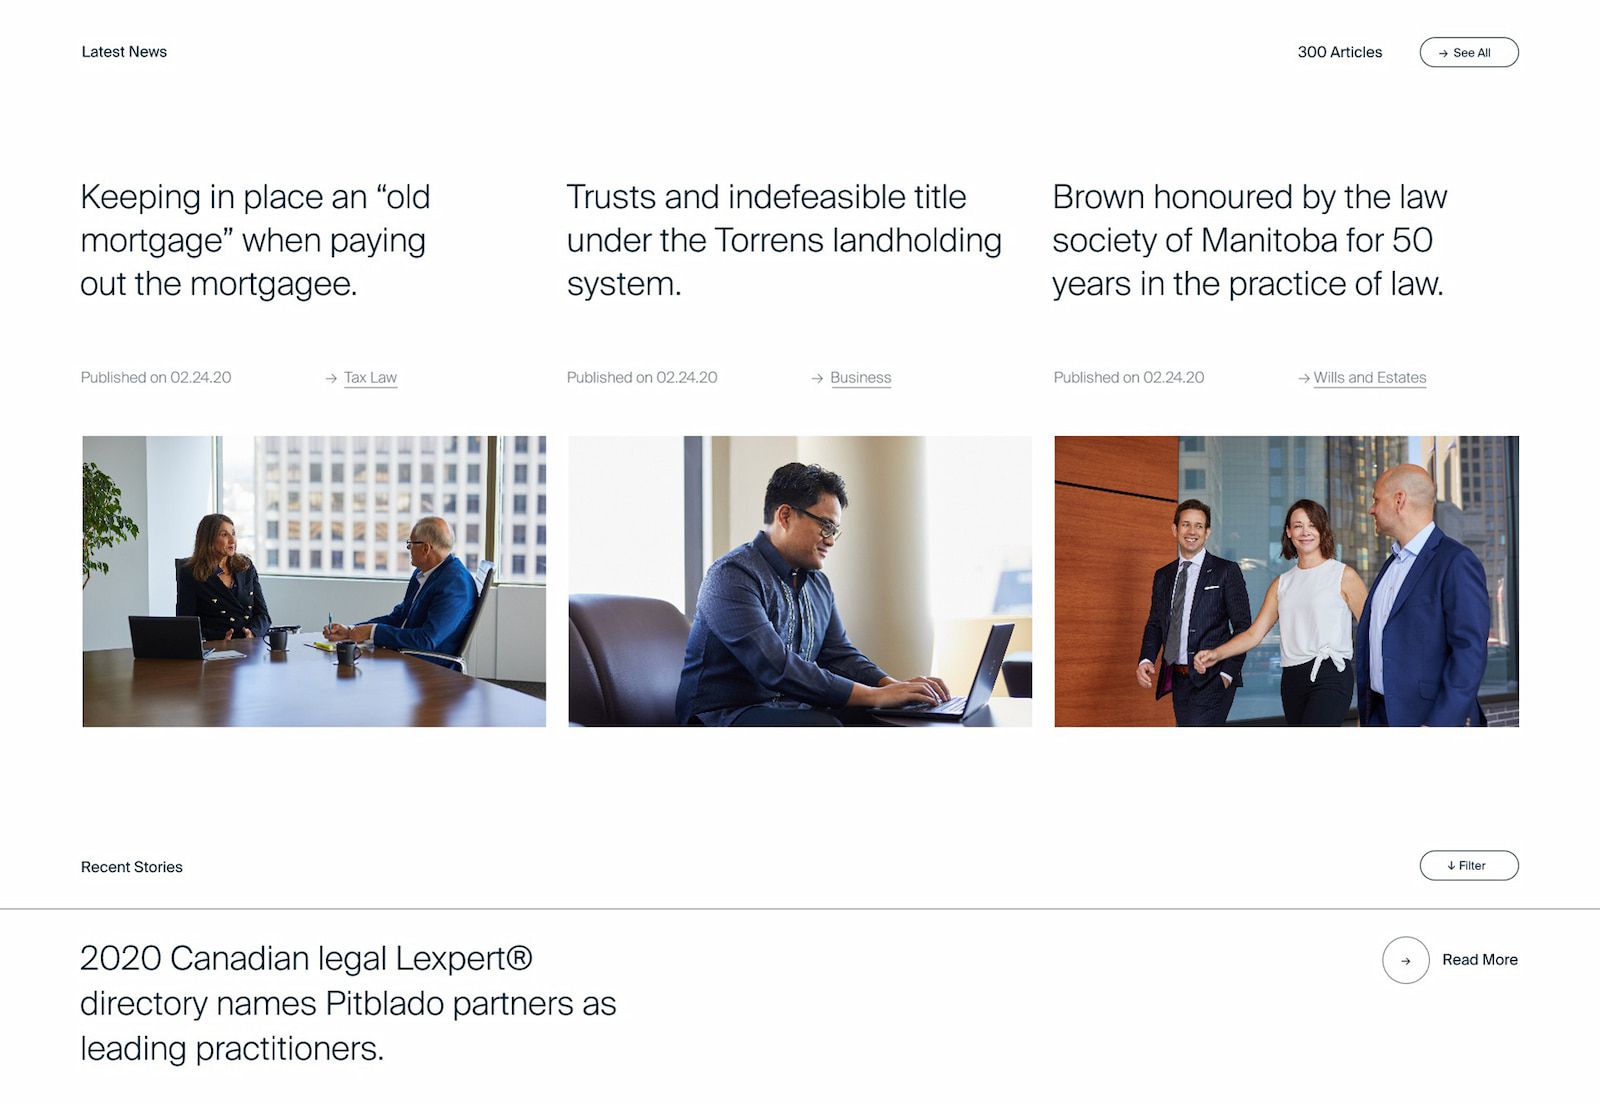 A screenshot of the news page on Pitblado's website. There are three columns of the latest news on a warm white background. Each has a title at the top, followed by an image of professionals in a business setting.